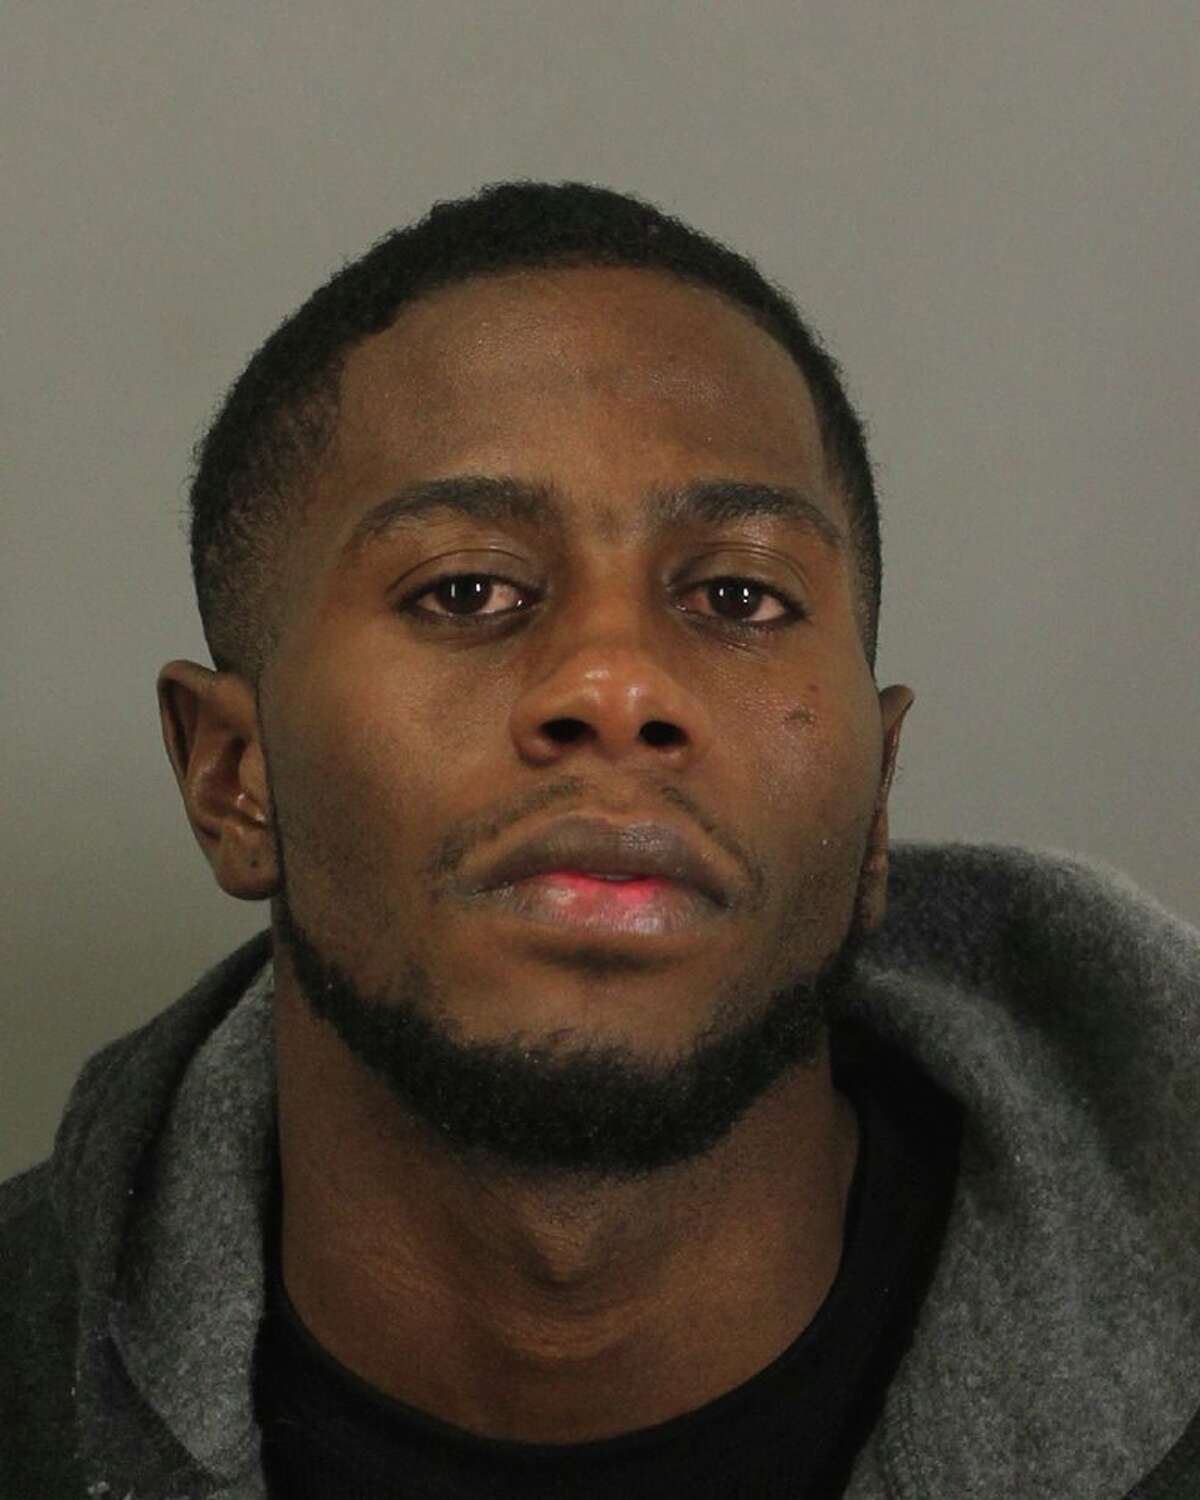 David Bryant Parkerson, 22, has a pending arrest warrant out in connection with the Dec. 28, 2017 murder of Anthony Green. Photo: Beaumont Police Department